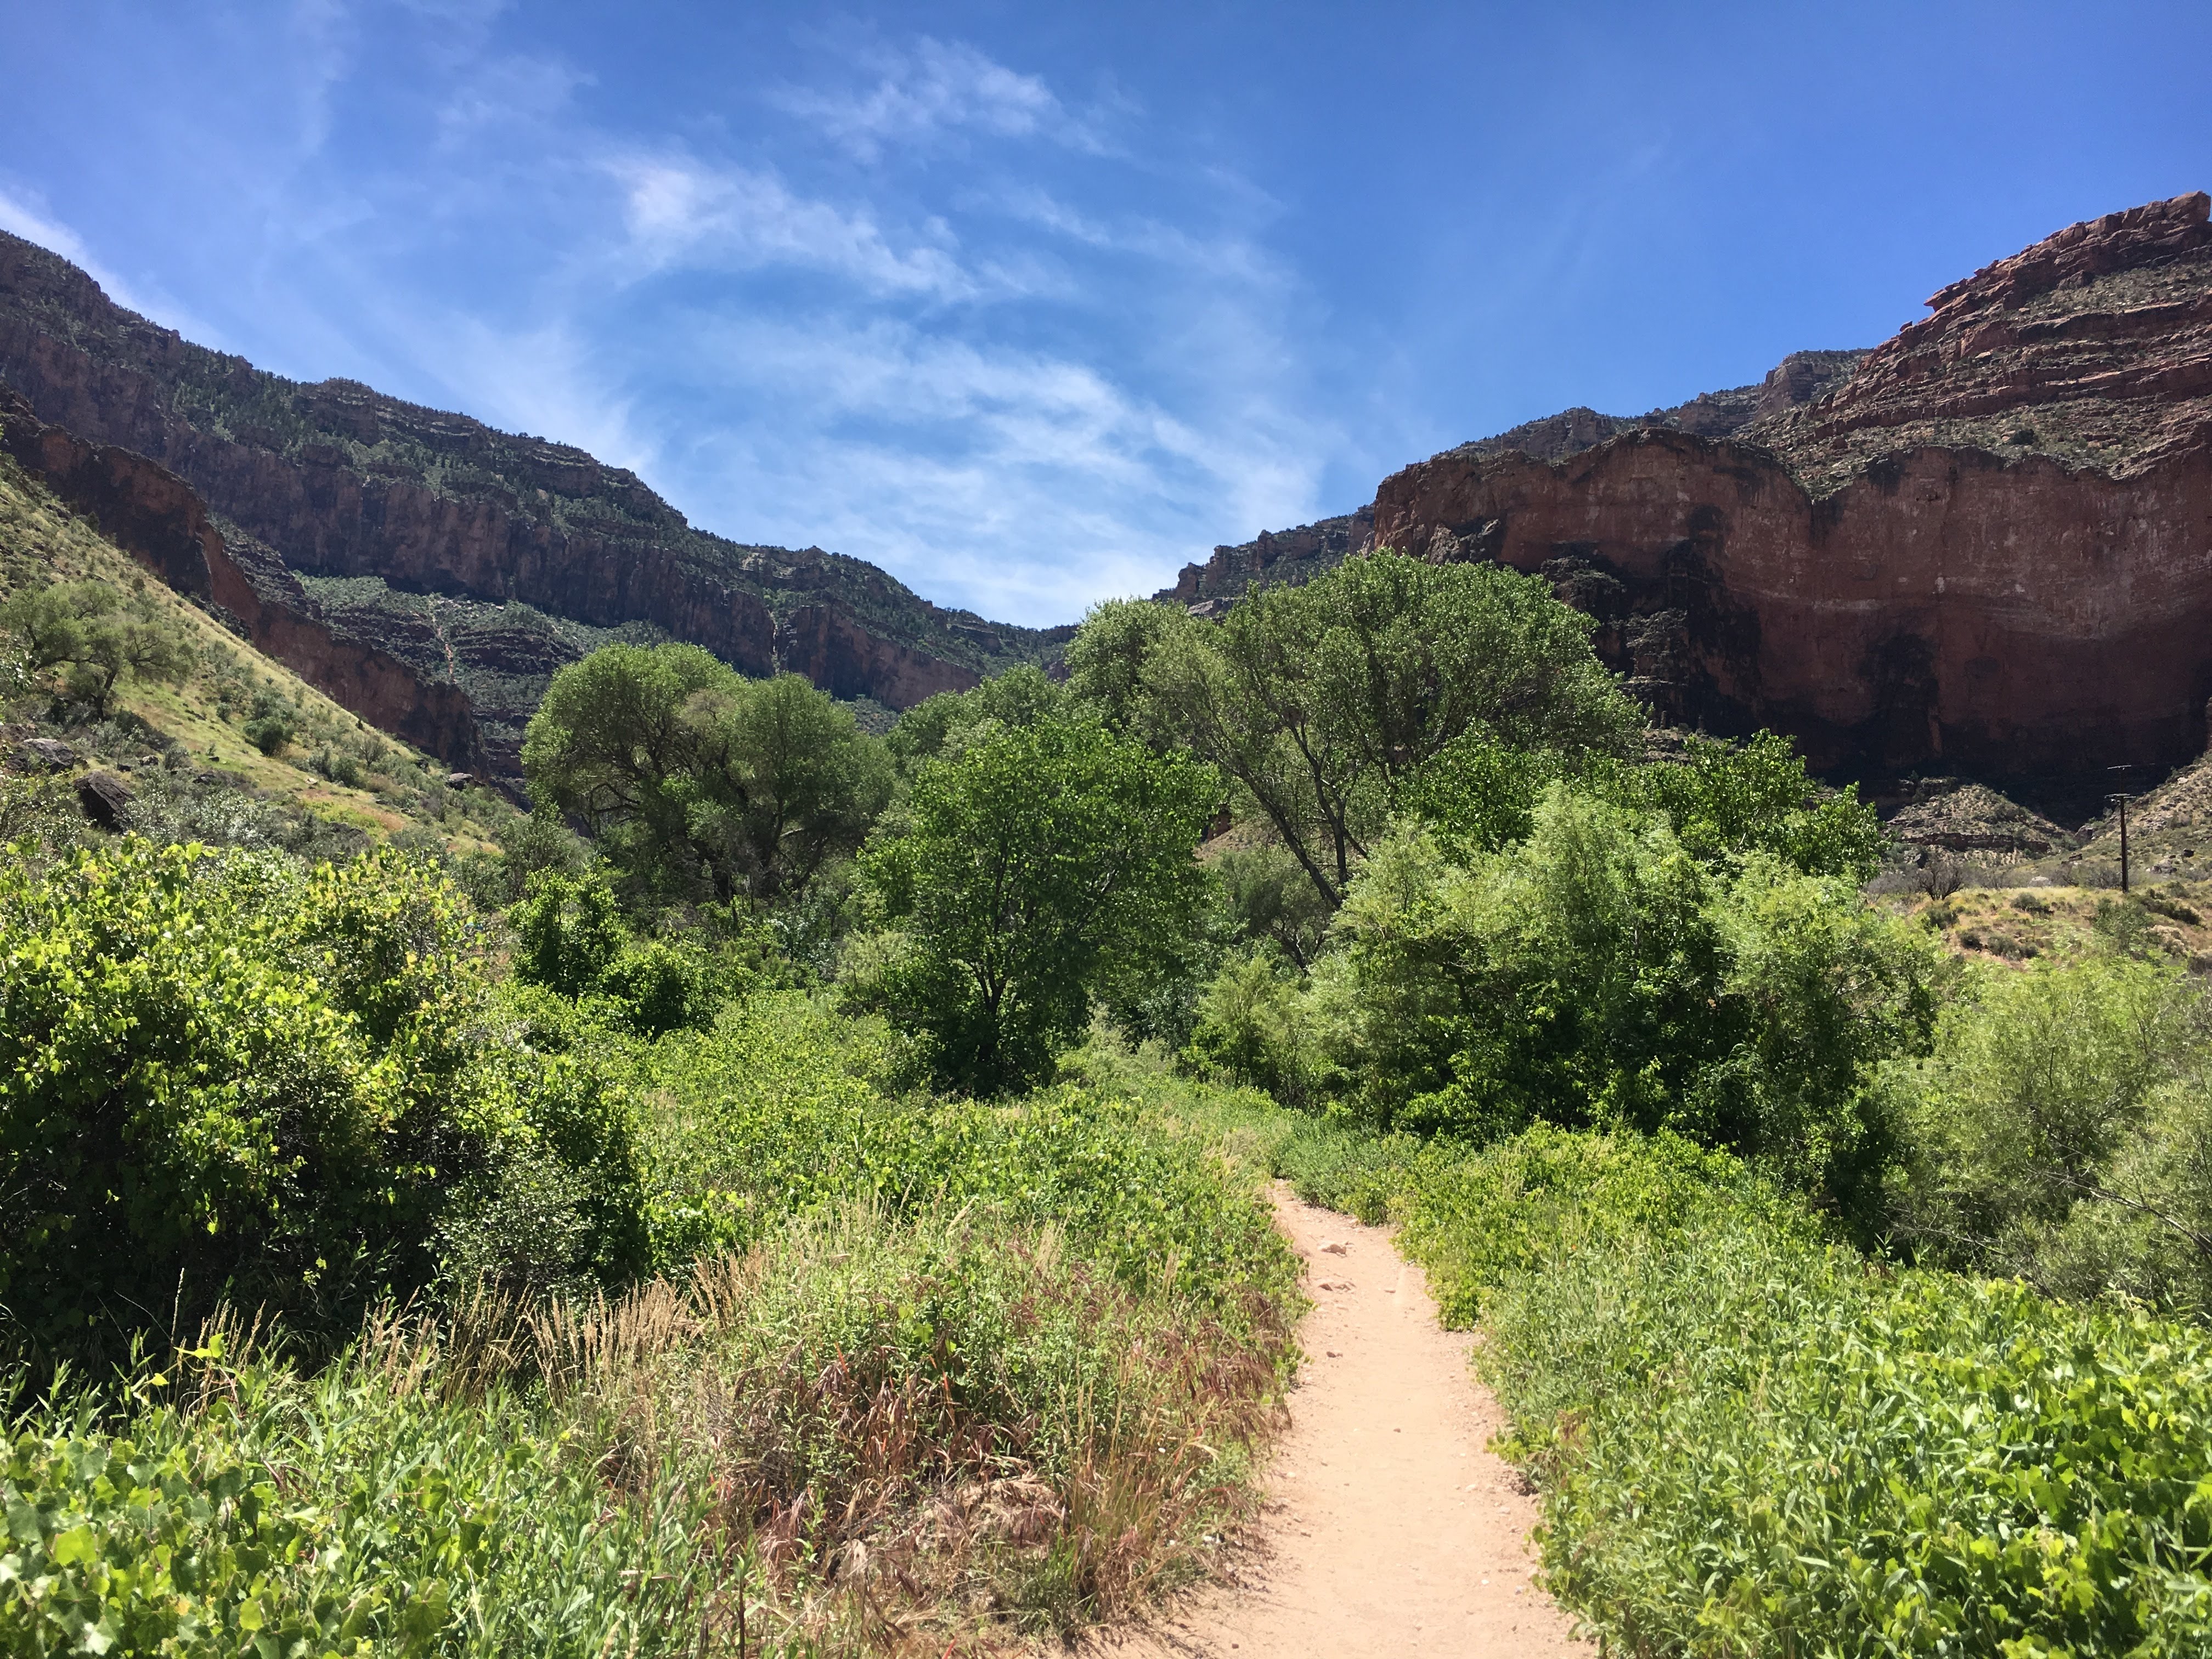 Entering the lush Indian Garden within the canyon